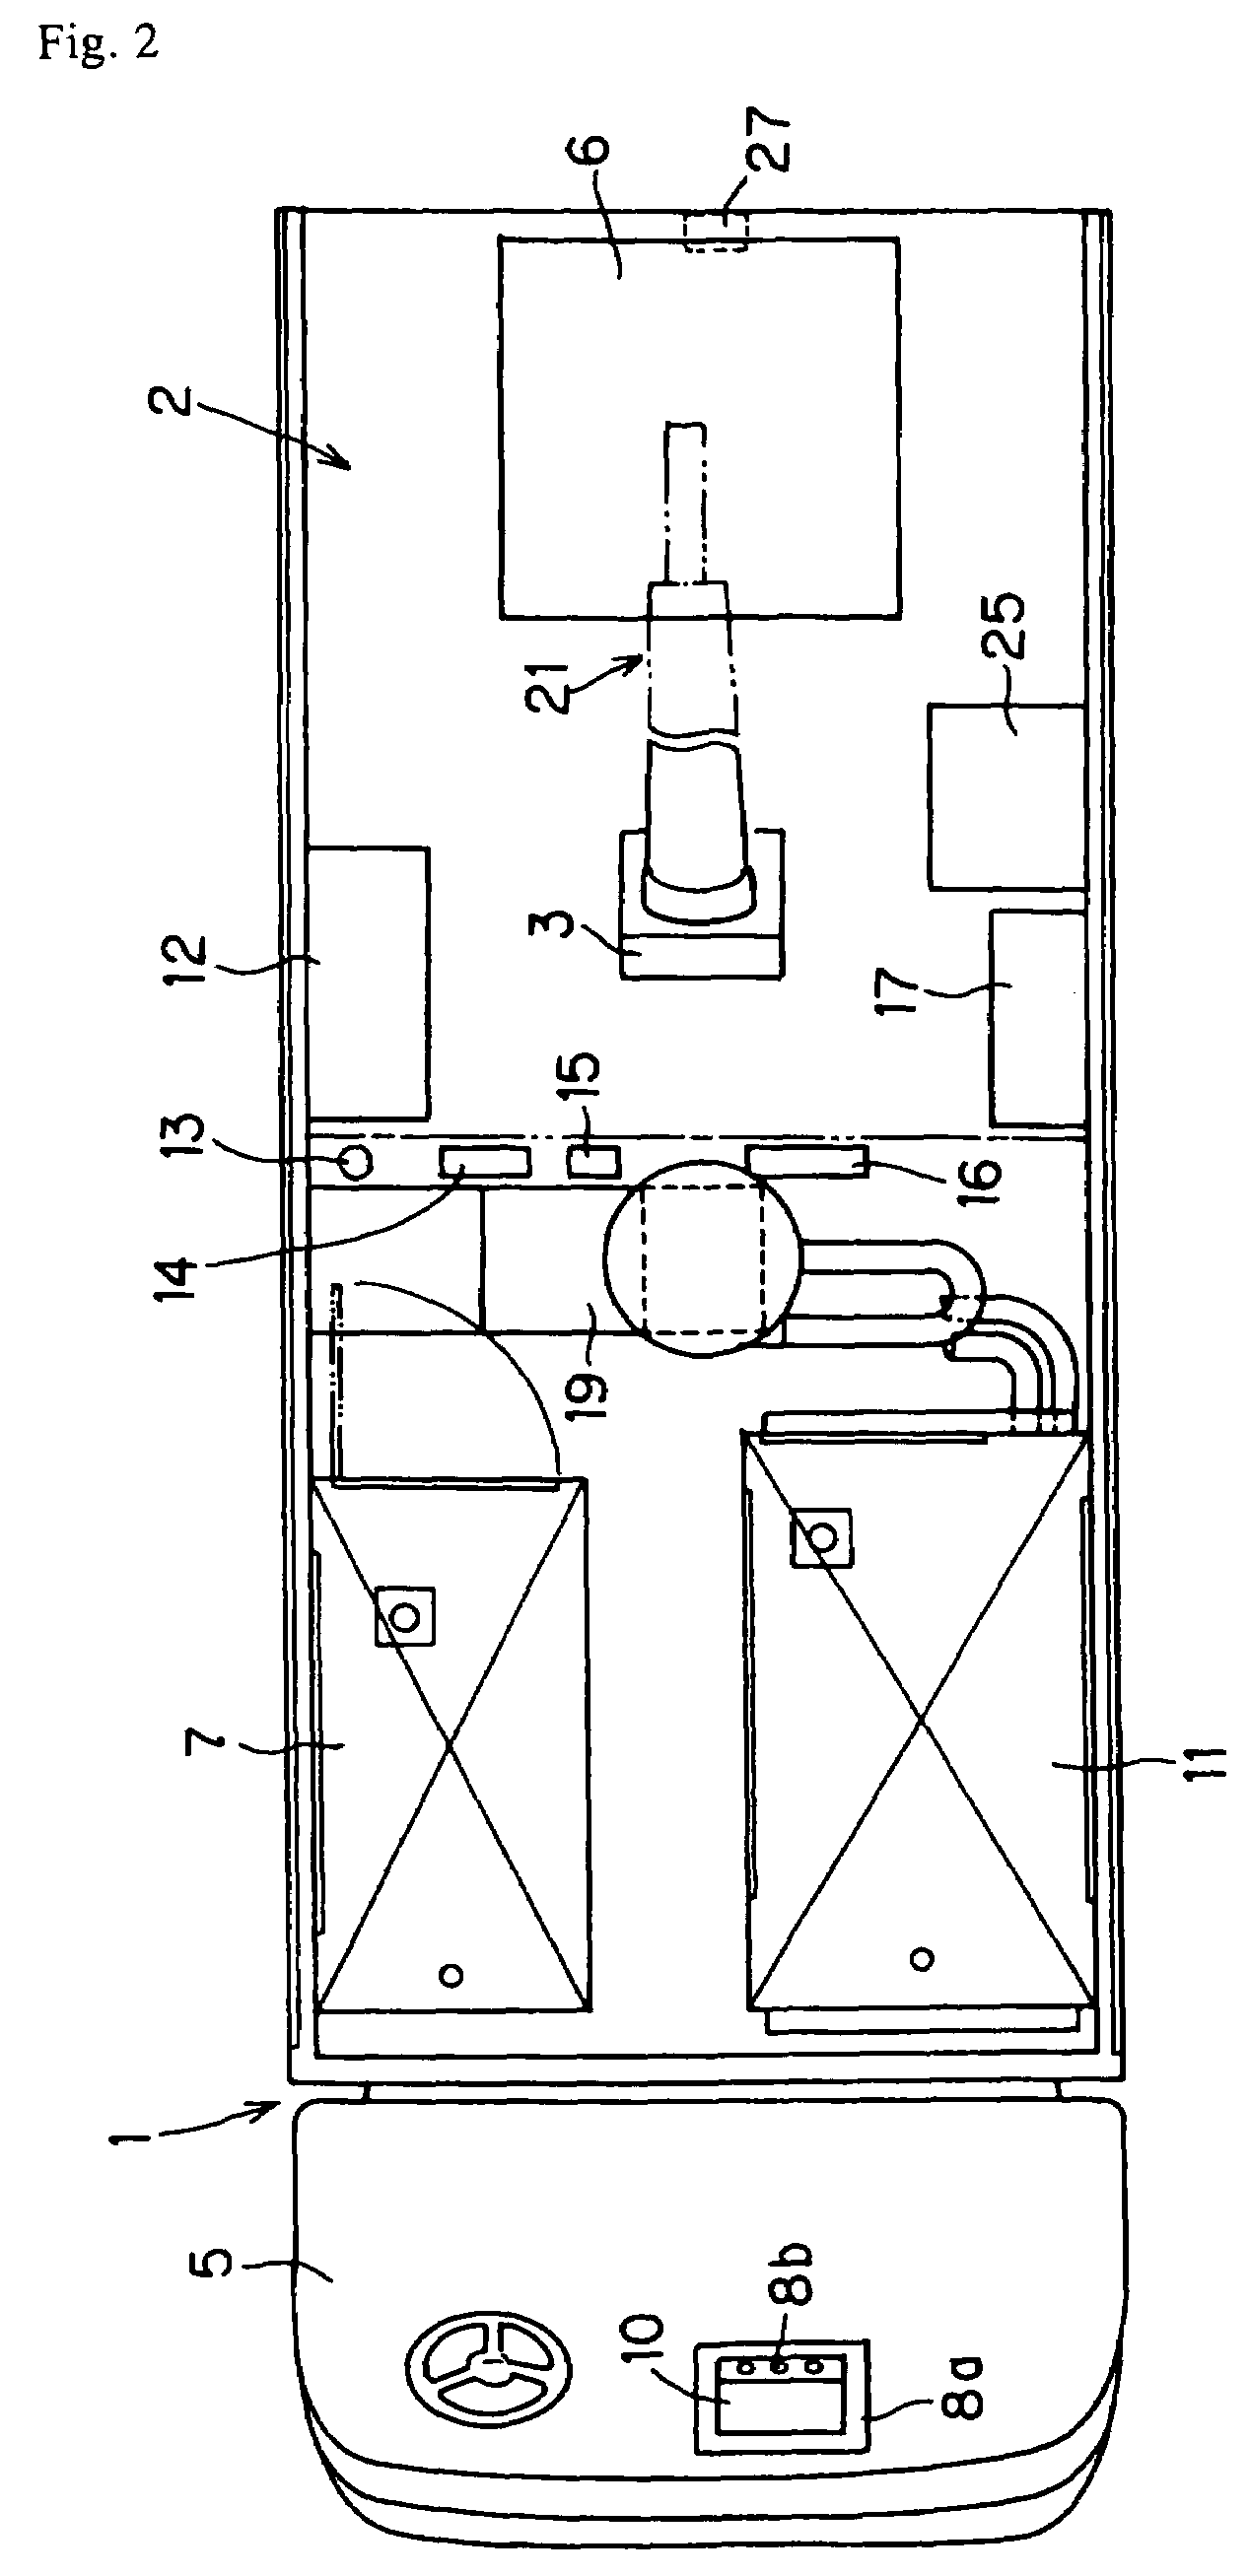 Method and system for cleaning glass surface of pavement light or reflector